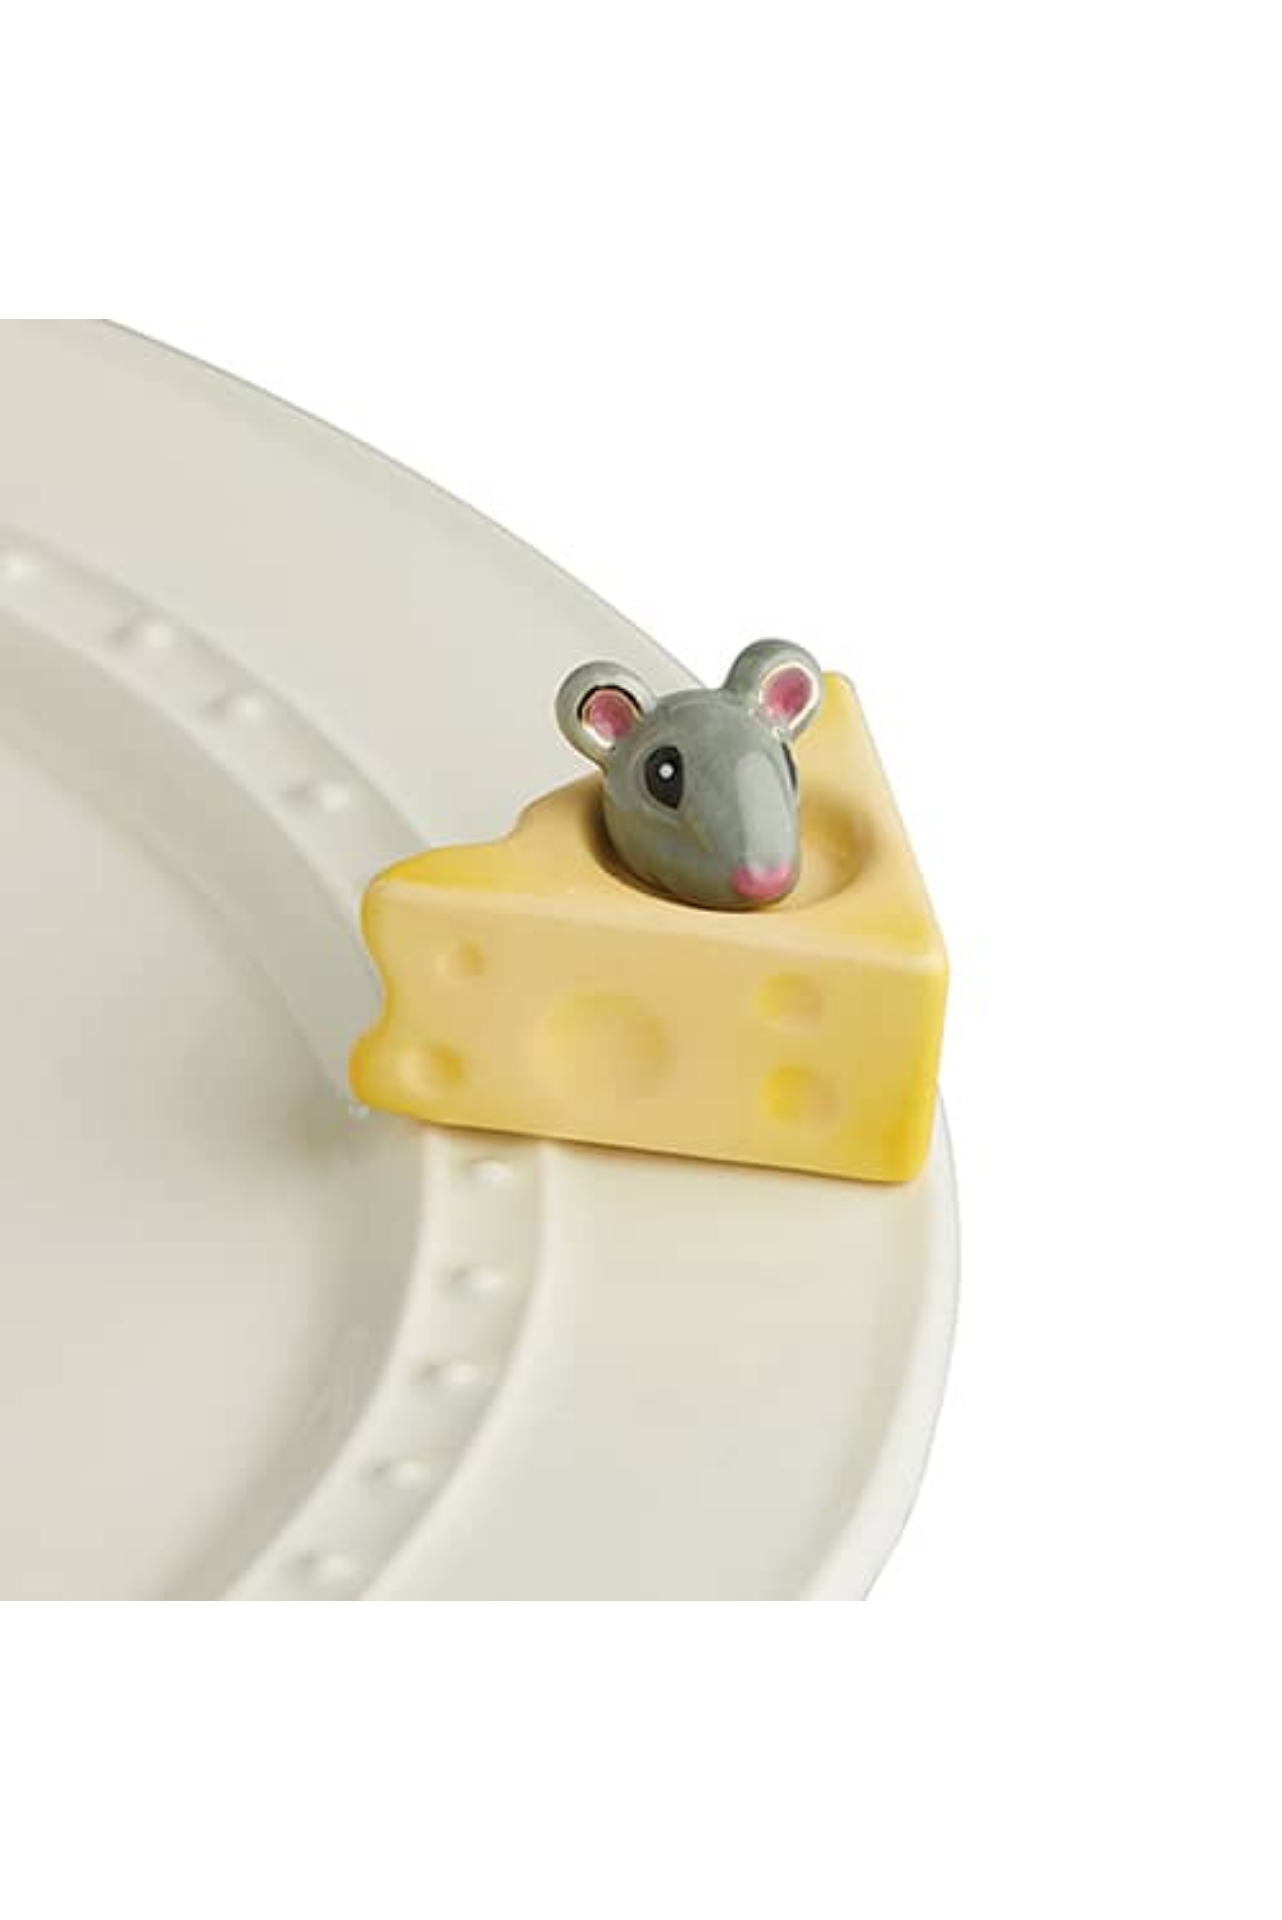 cheese, please! (mouse & cheese)